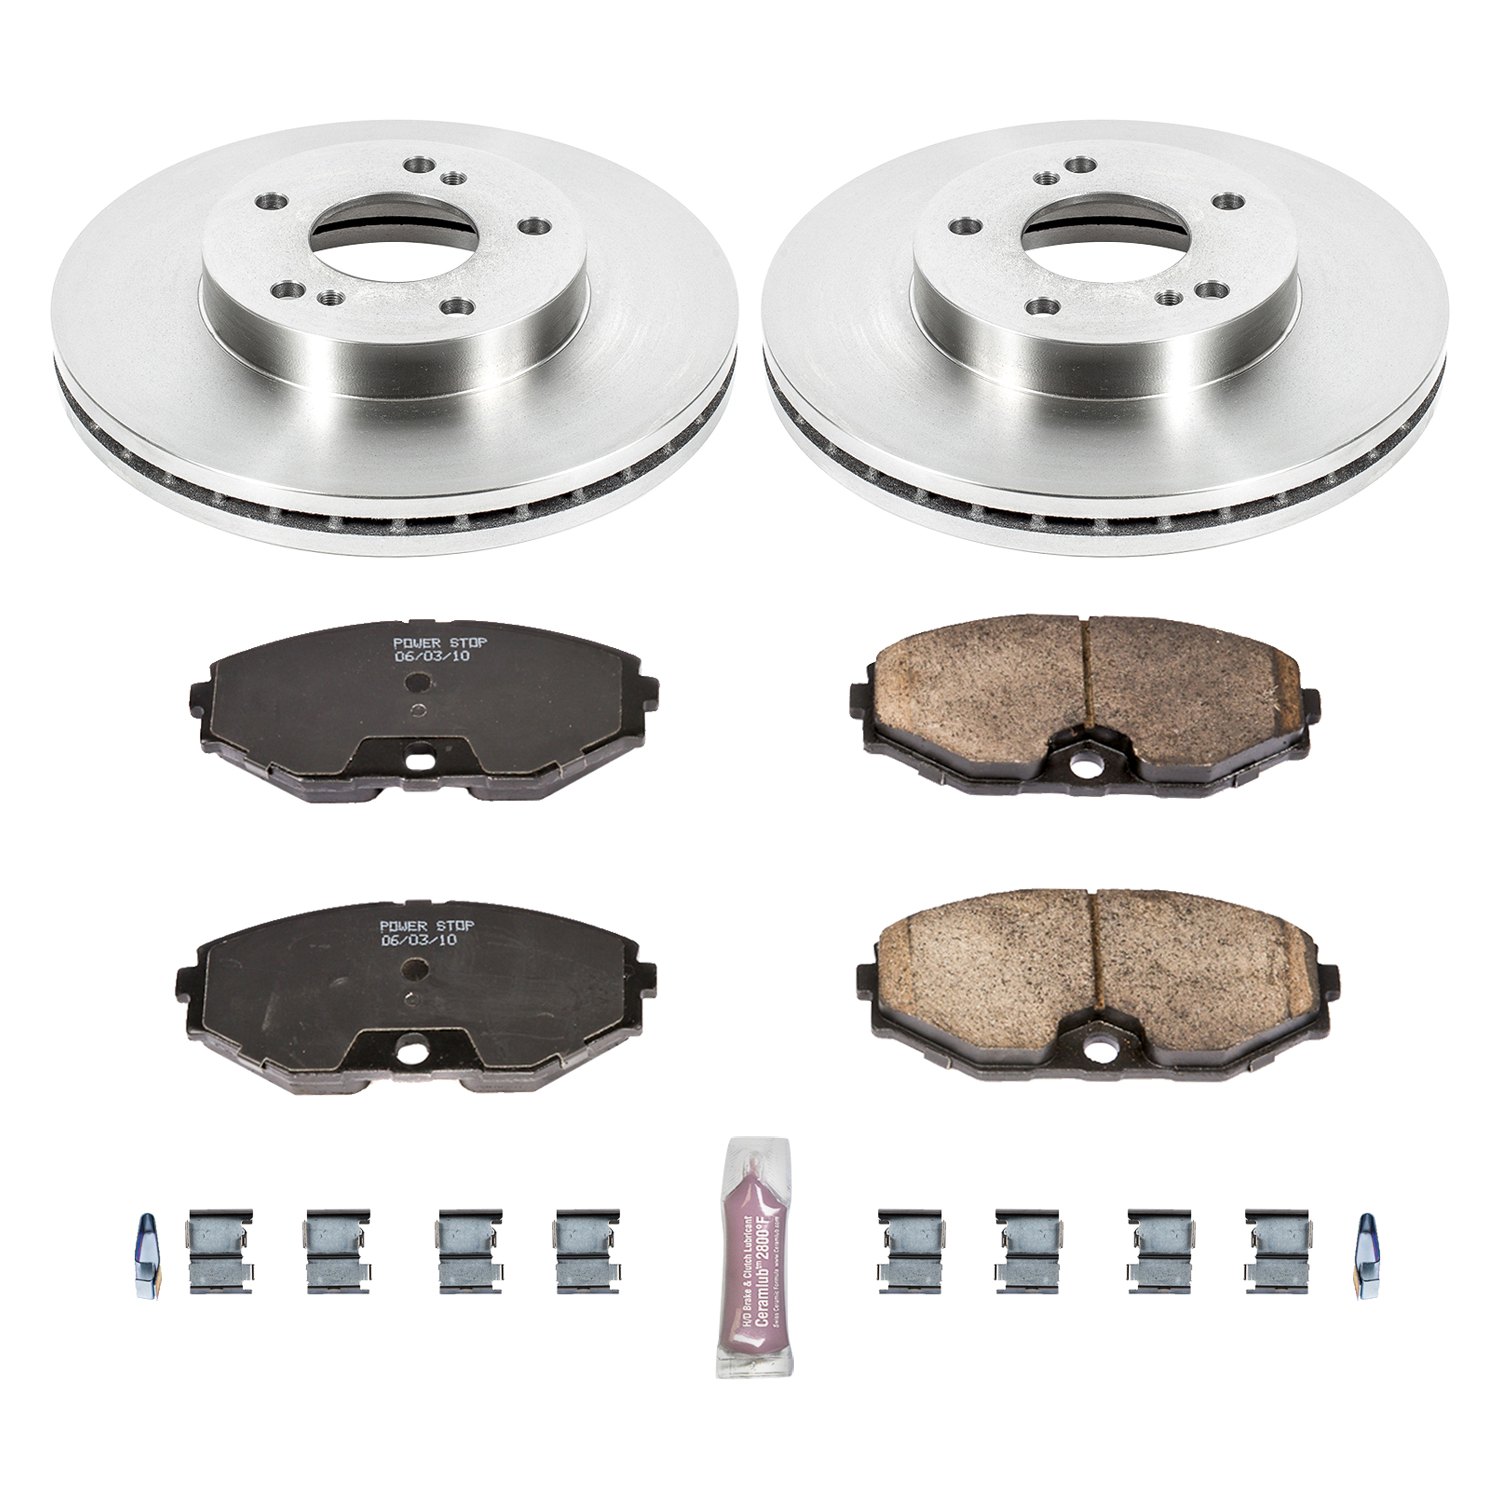 Autospecialty KOE6333 1-Click OE Replacement Brake Kit 